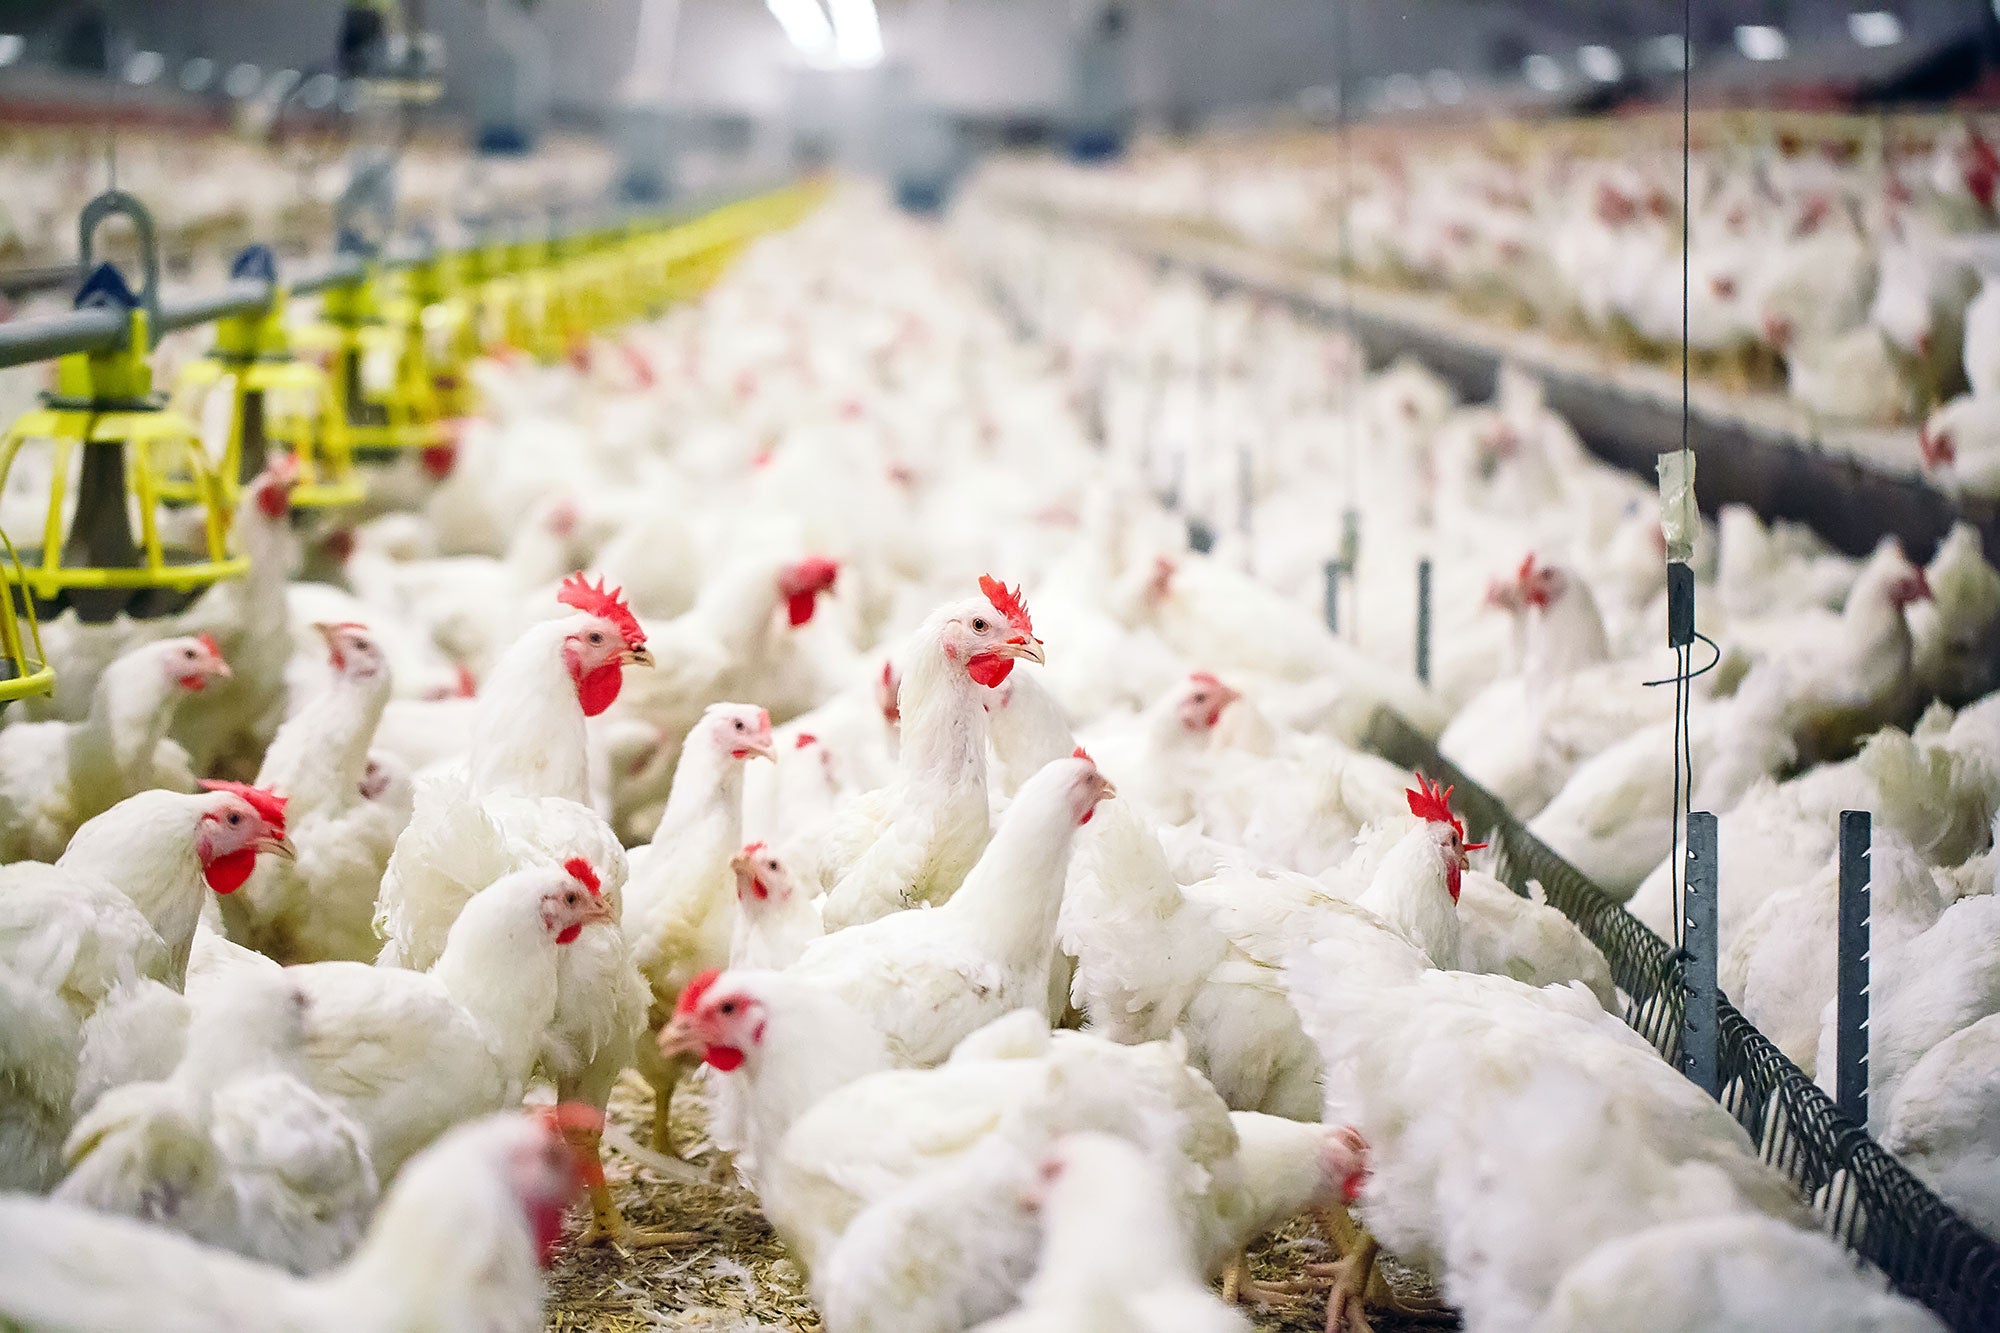 SMART Broiler utilizes technology to improve poultry welfare | AGDAILY